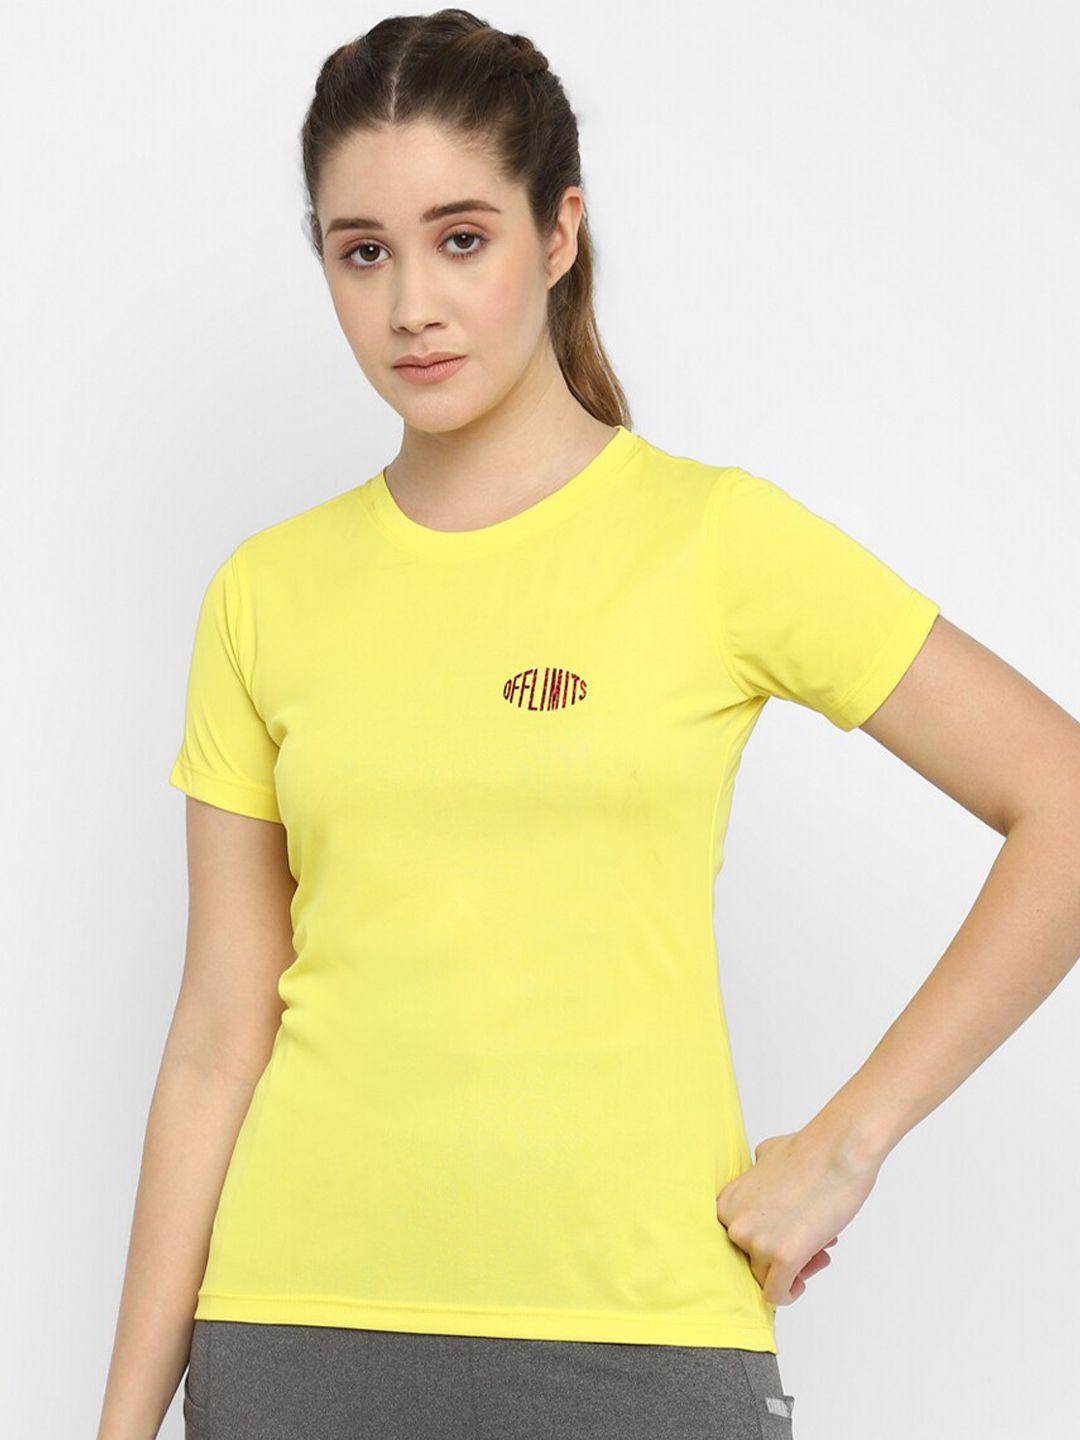 off-limits-women-yellow-antimicrobial-applique-t-shirt